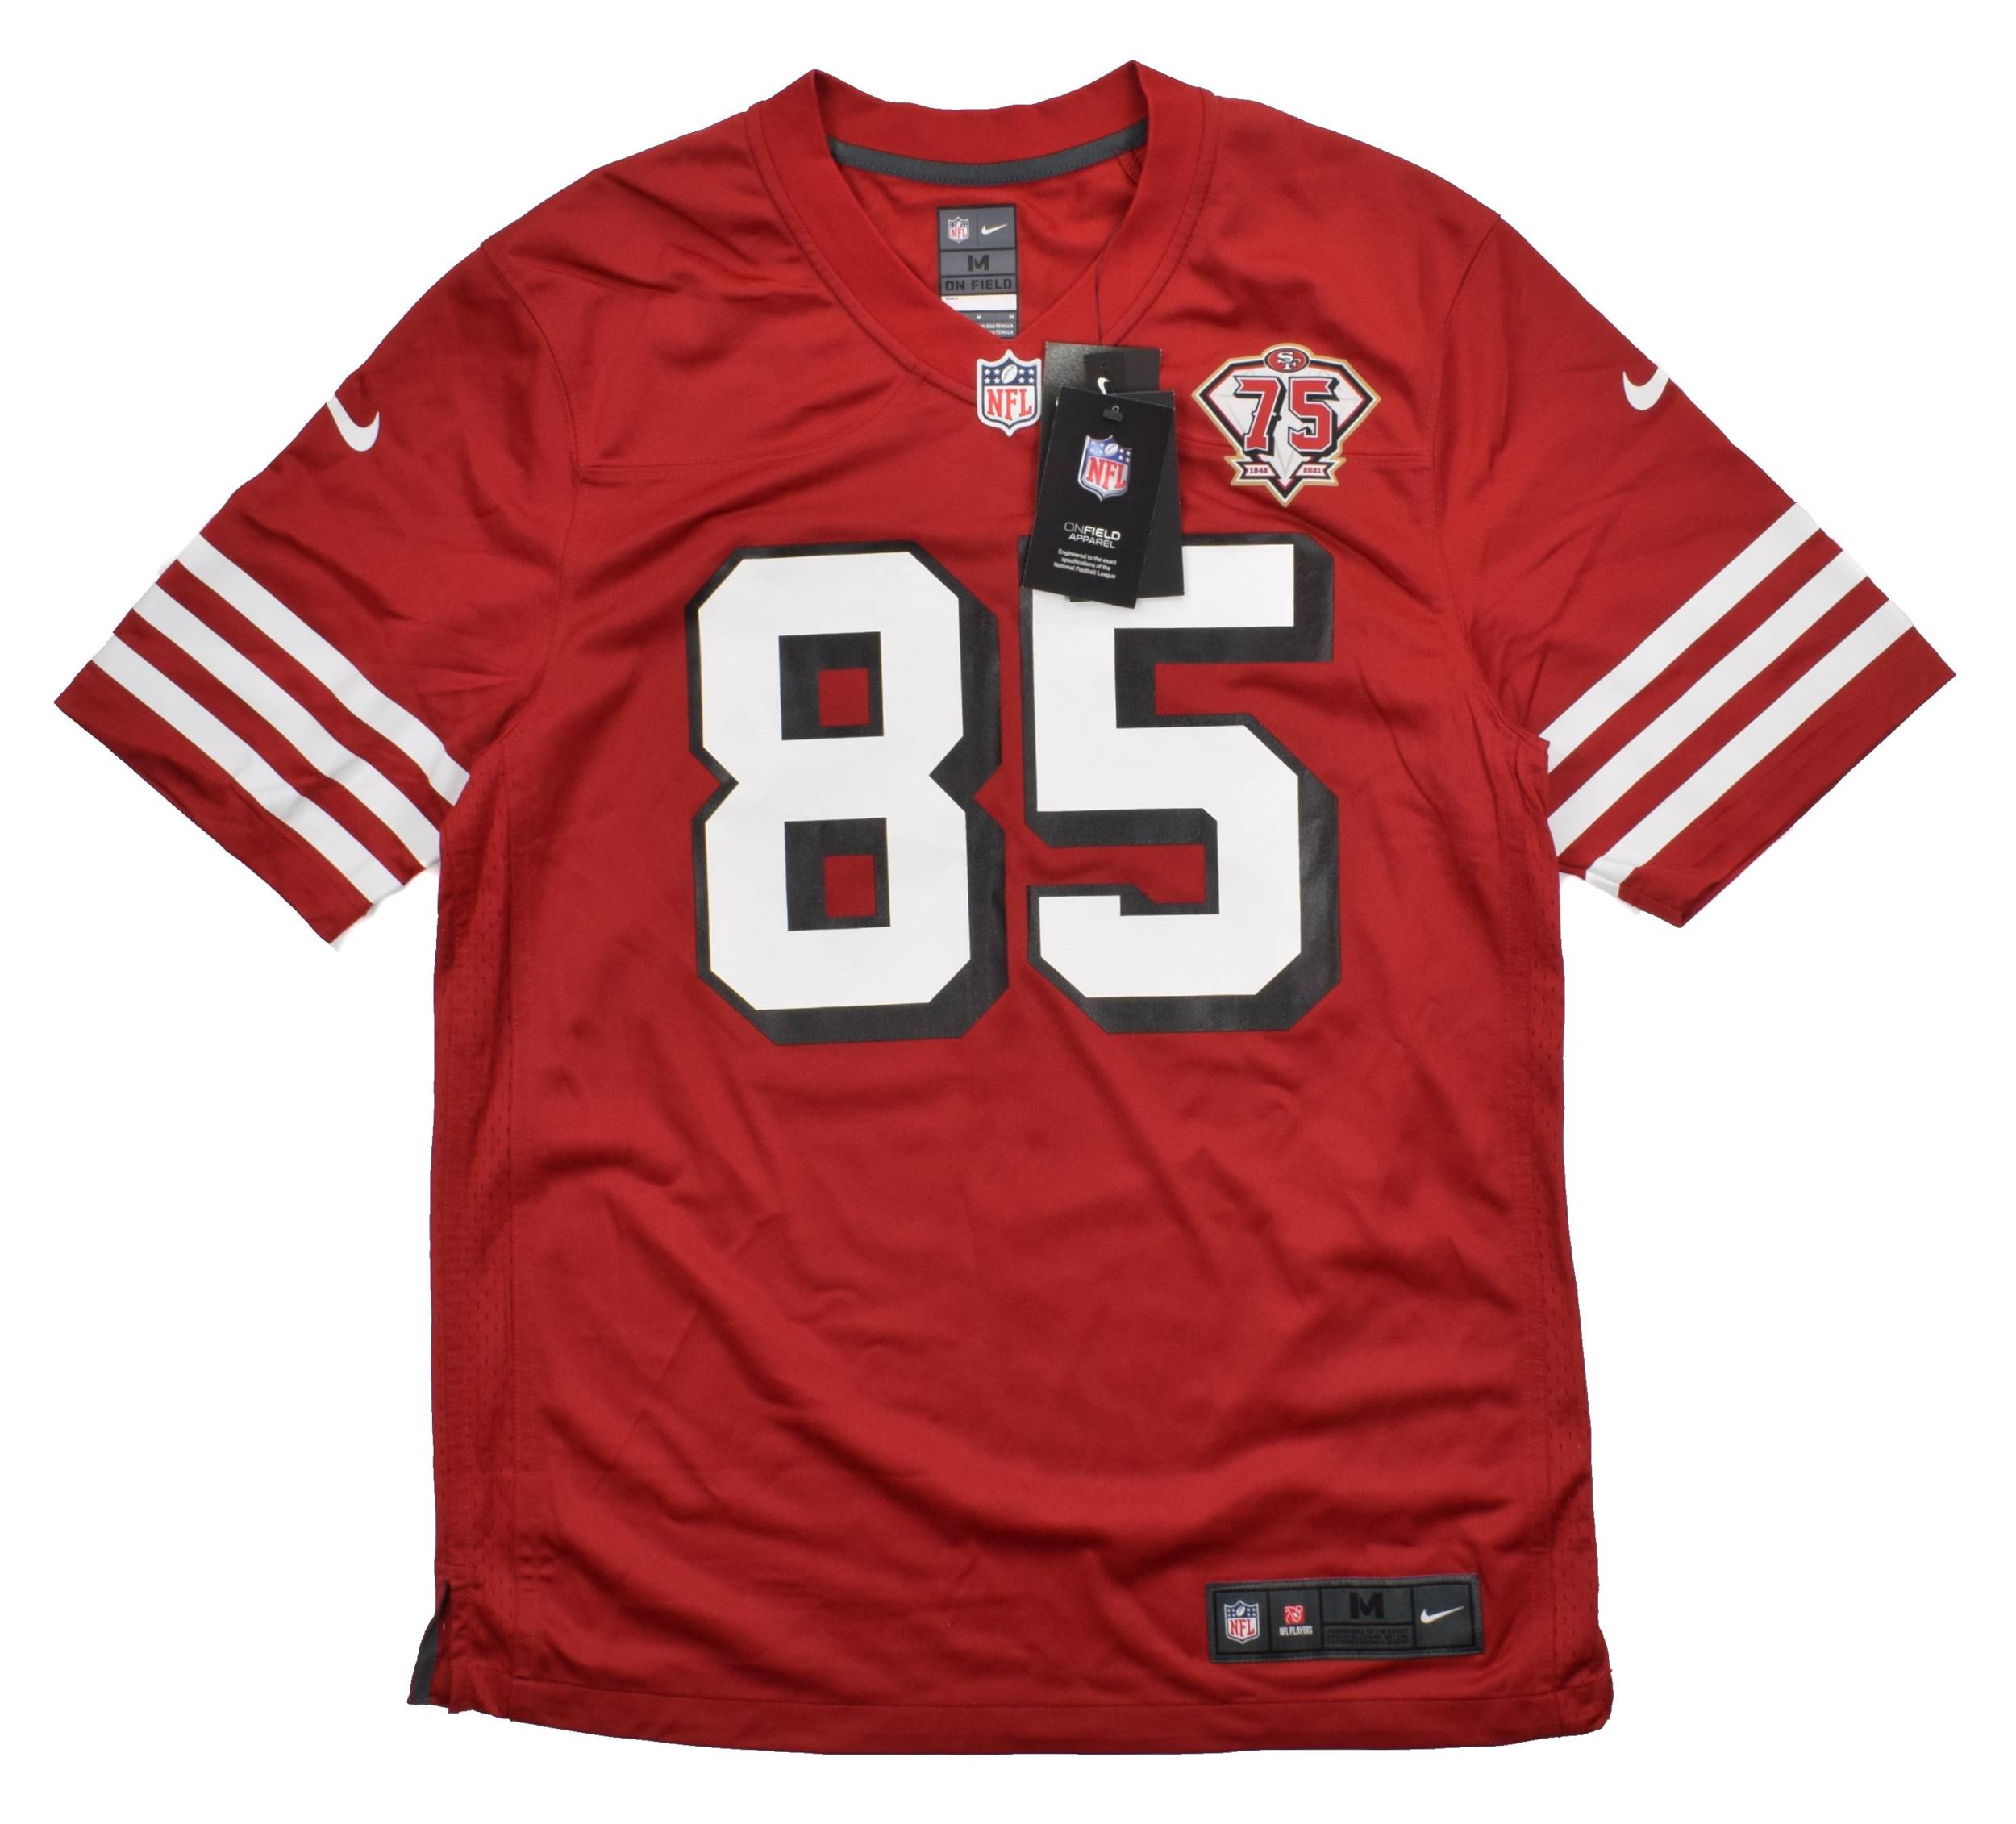 kittle jersey number